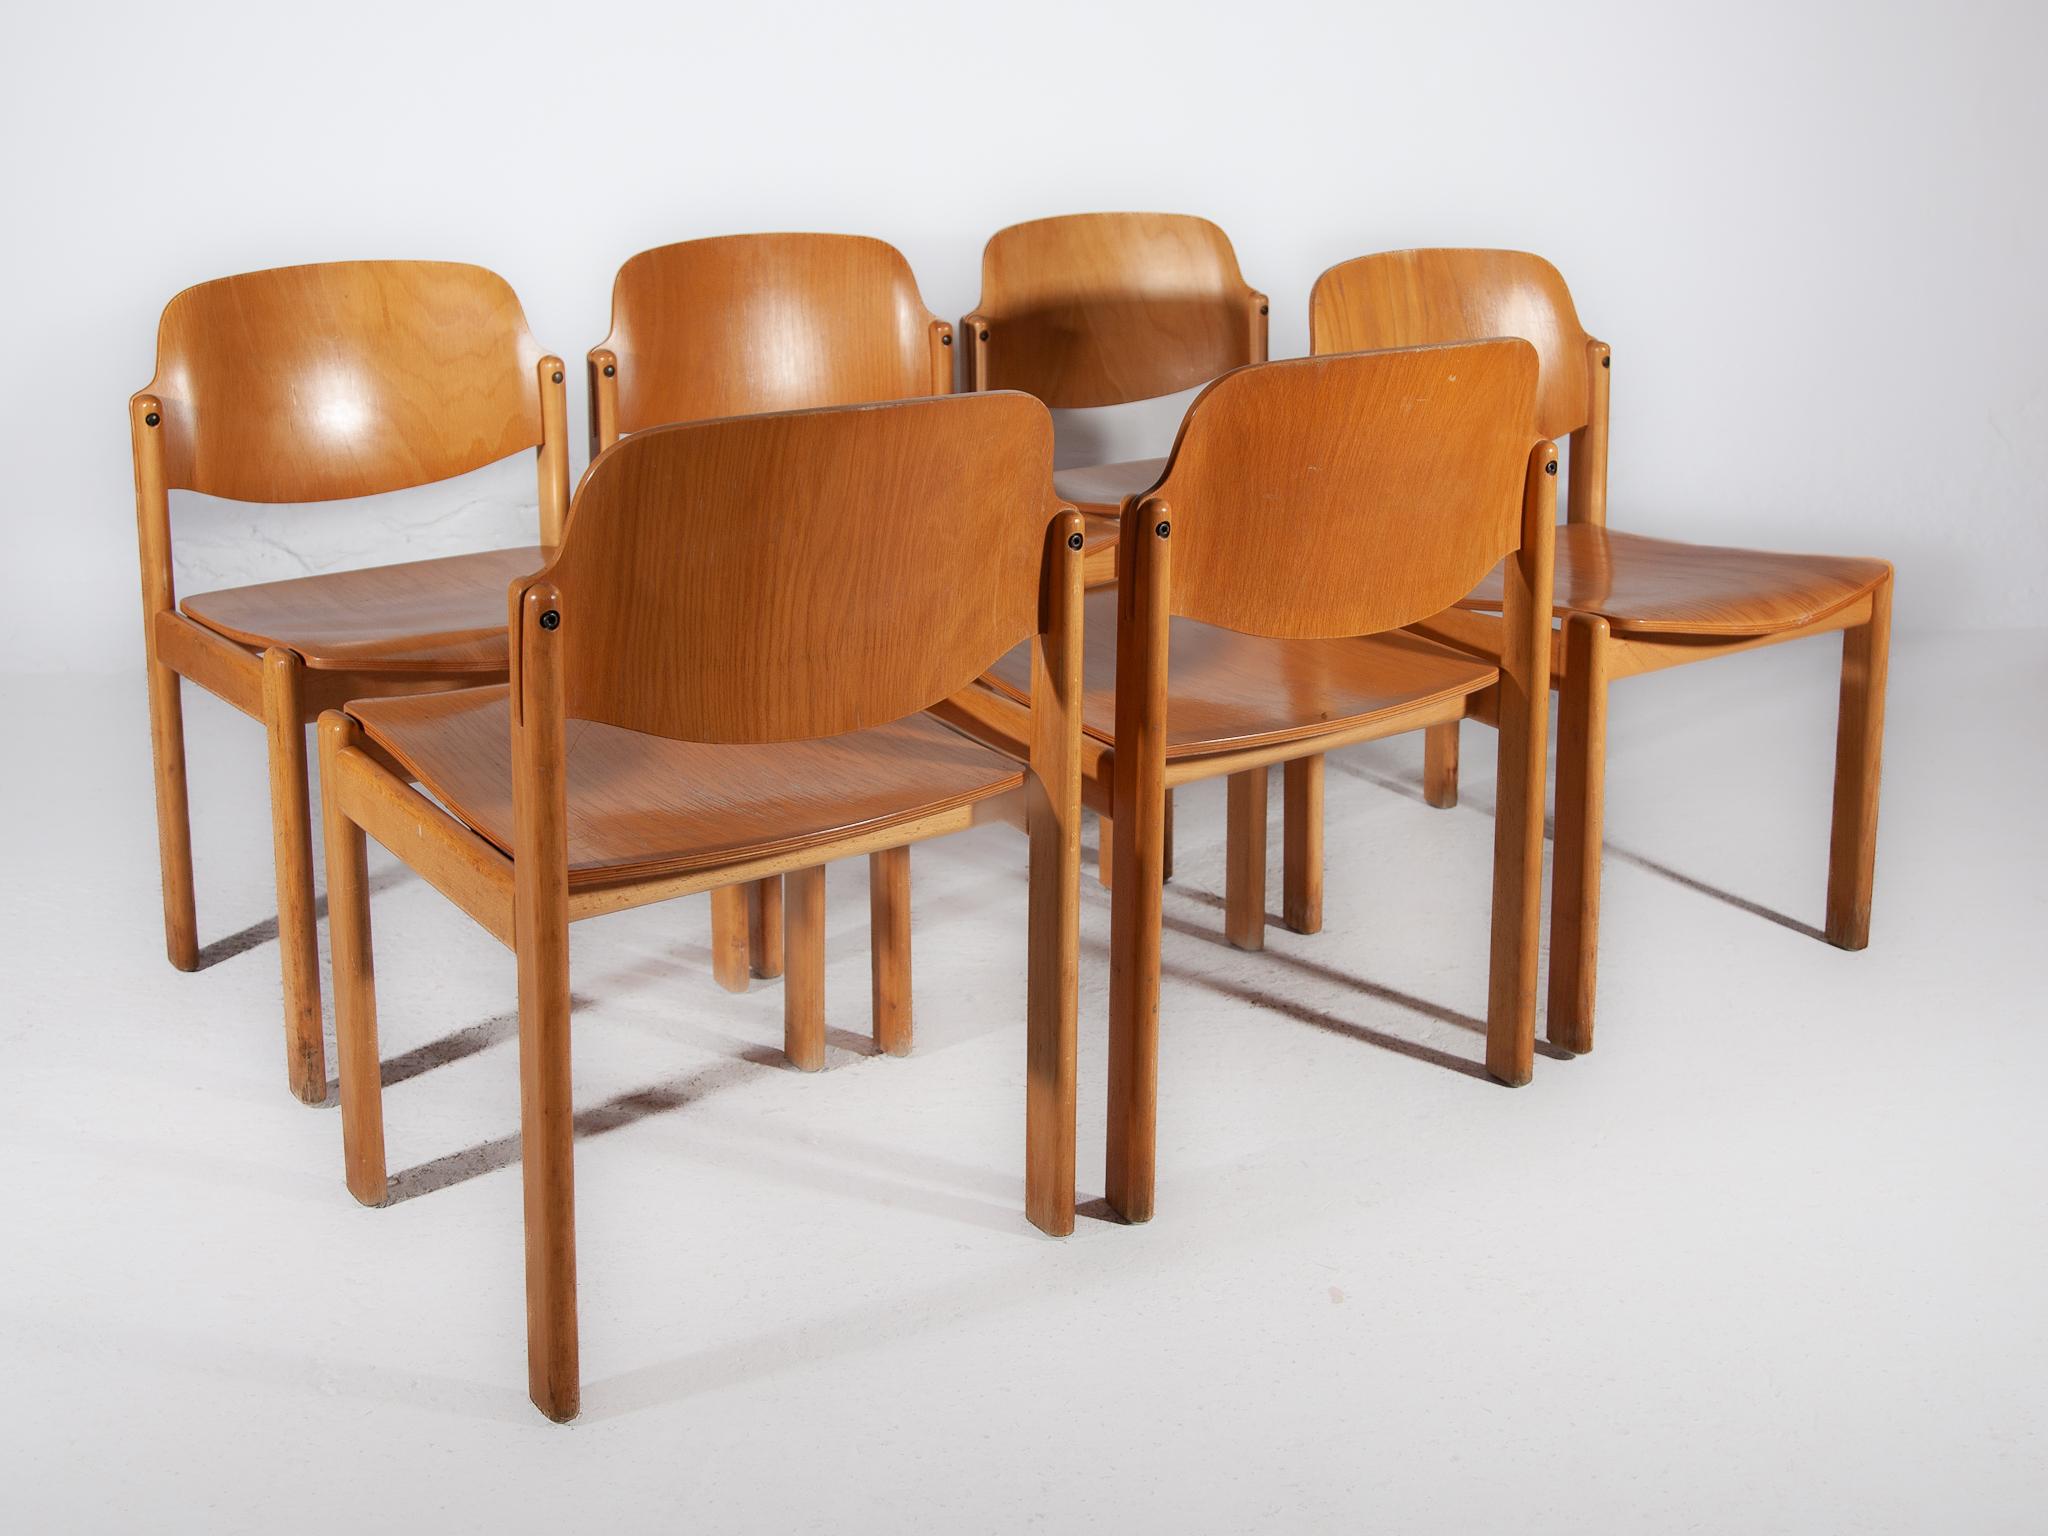 Set of Twelve Beech Wood Dining Chairs, Germany 1970s For Sale 7